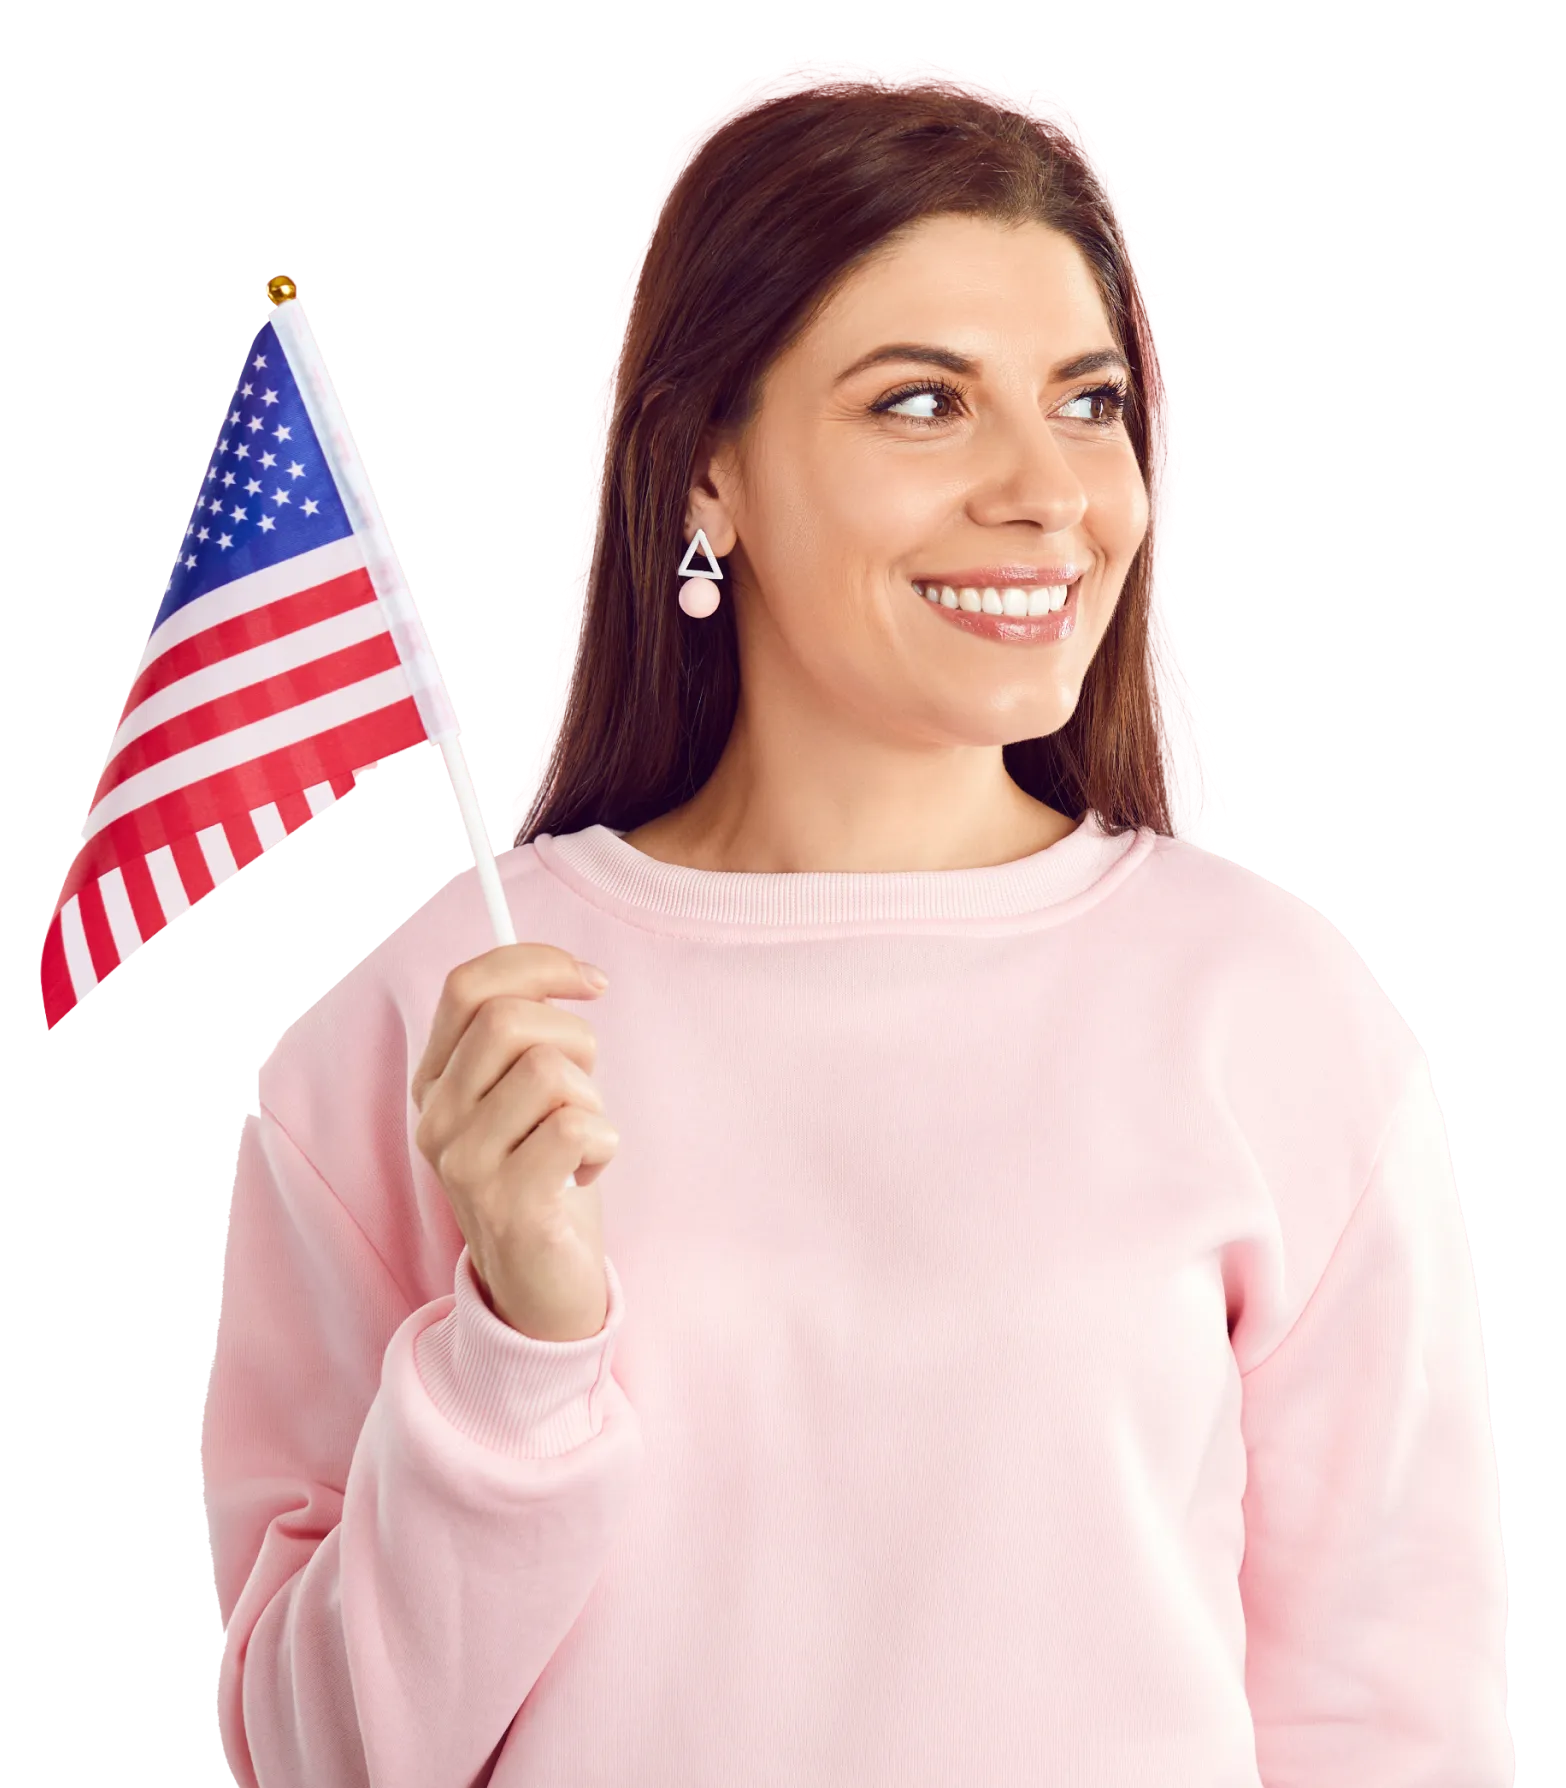 Smiling young woman waving an American flag